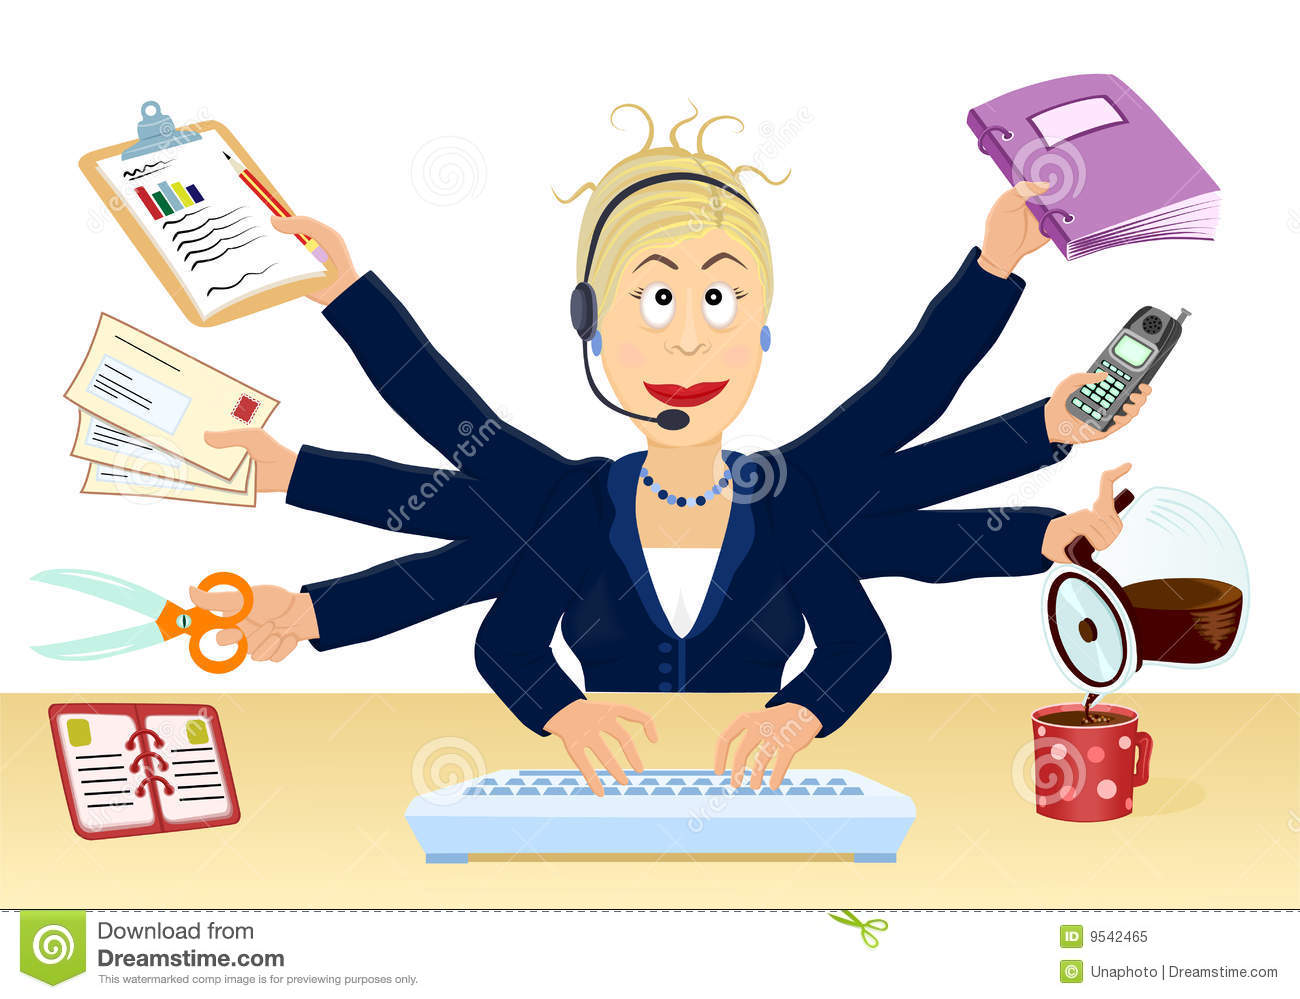 Stress And Multitasking At The Office Royalty Free Stock Photo   Image